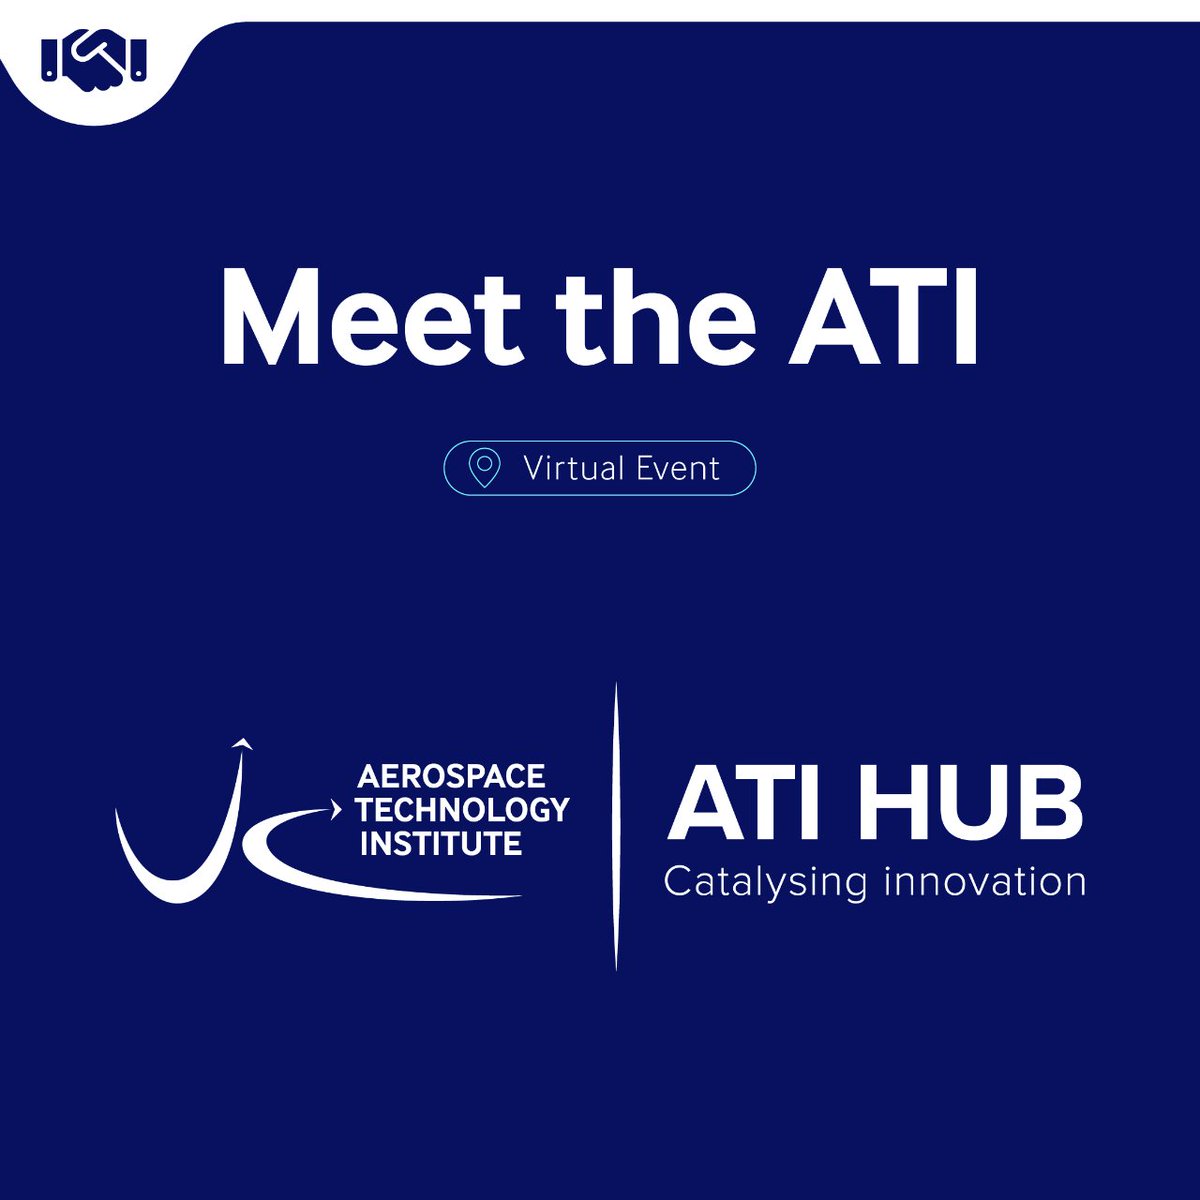 Join us for our monthly Meet the ATI session from 13:00 - 14:00 on Tuesday 9th April to find out more about the ATI, our technology strategy Destination Zero, our funding programmes and the ATI Hub.   Register today: bit.ly/3IRCd12 #ATIHub #DestinationZero